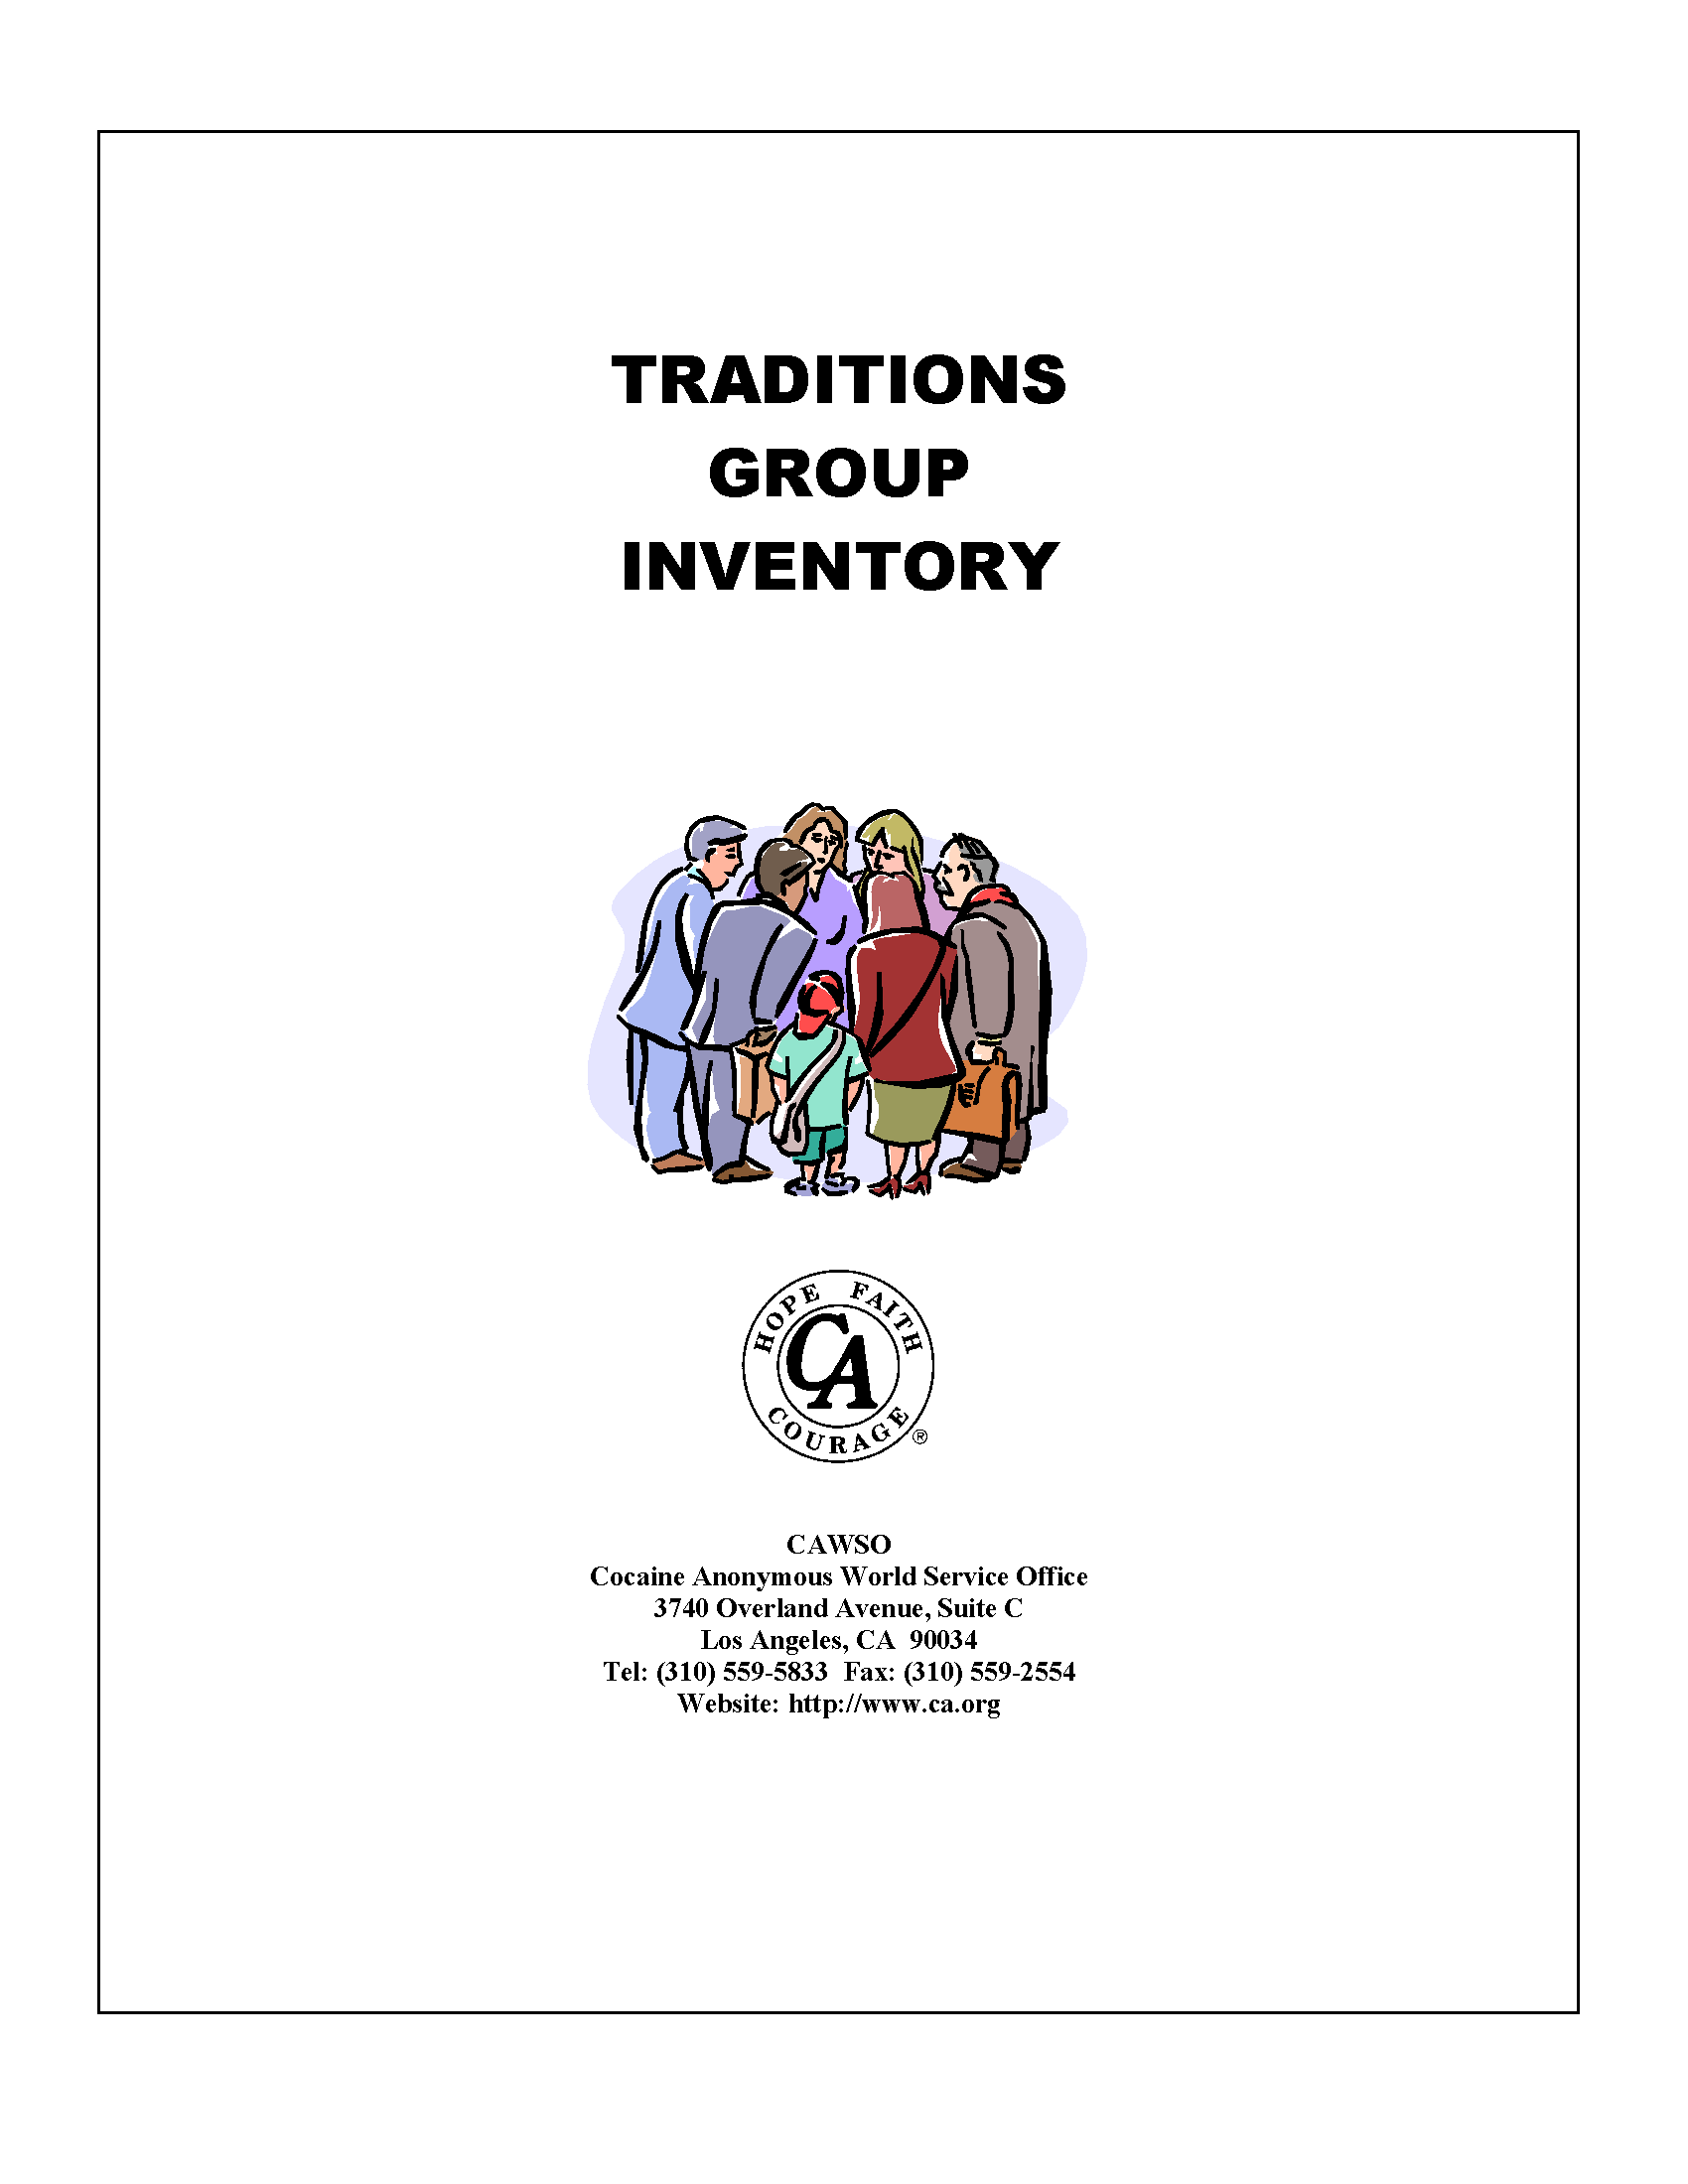 Traditions-Groupinventory.png